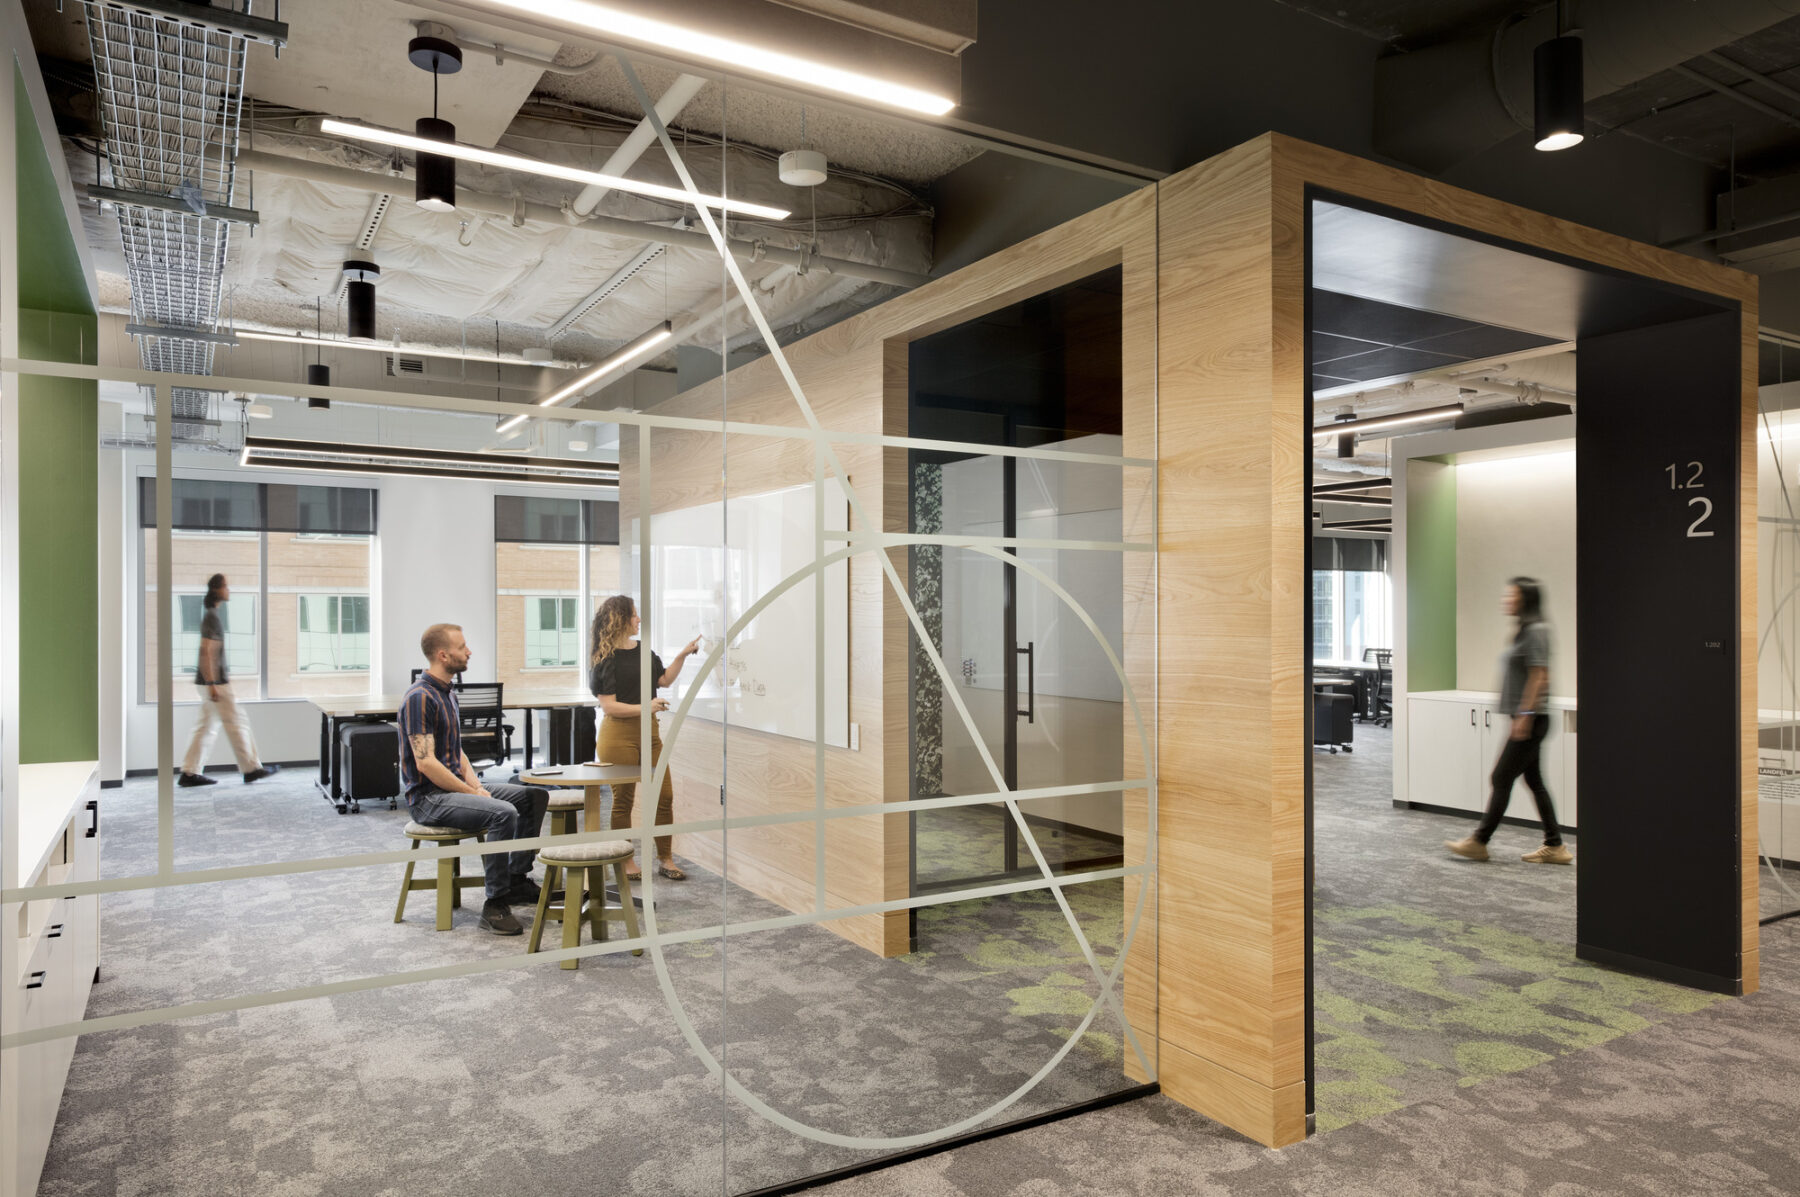 Team neighborhood area with open office space and two individuals meeting with a whiteboard